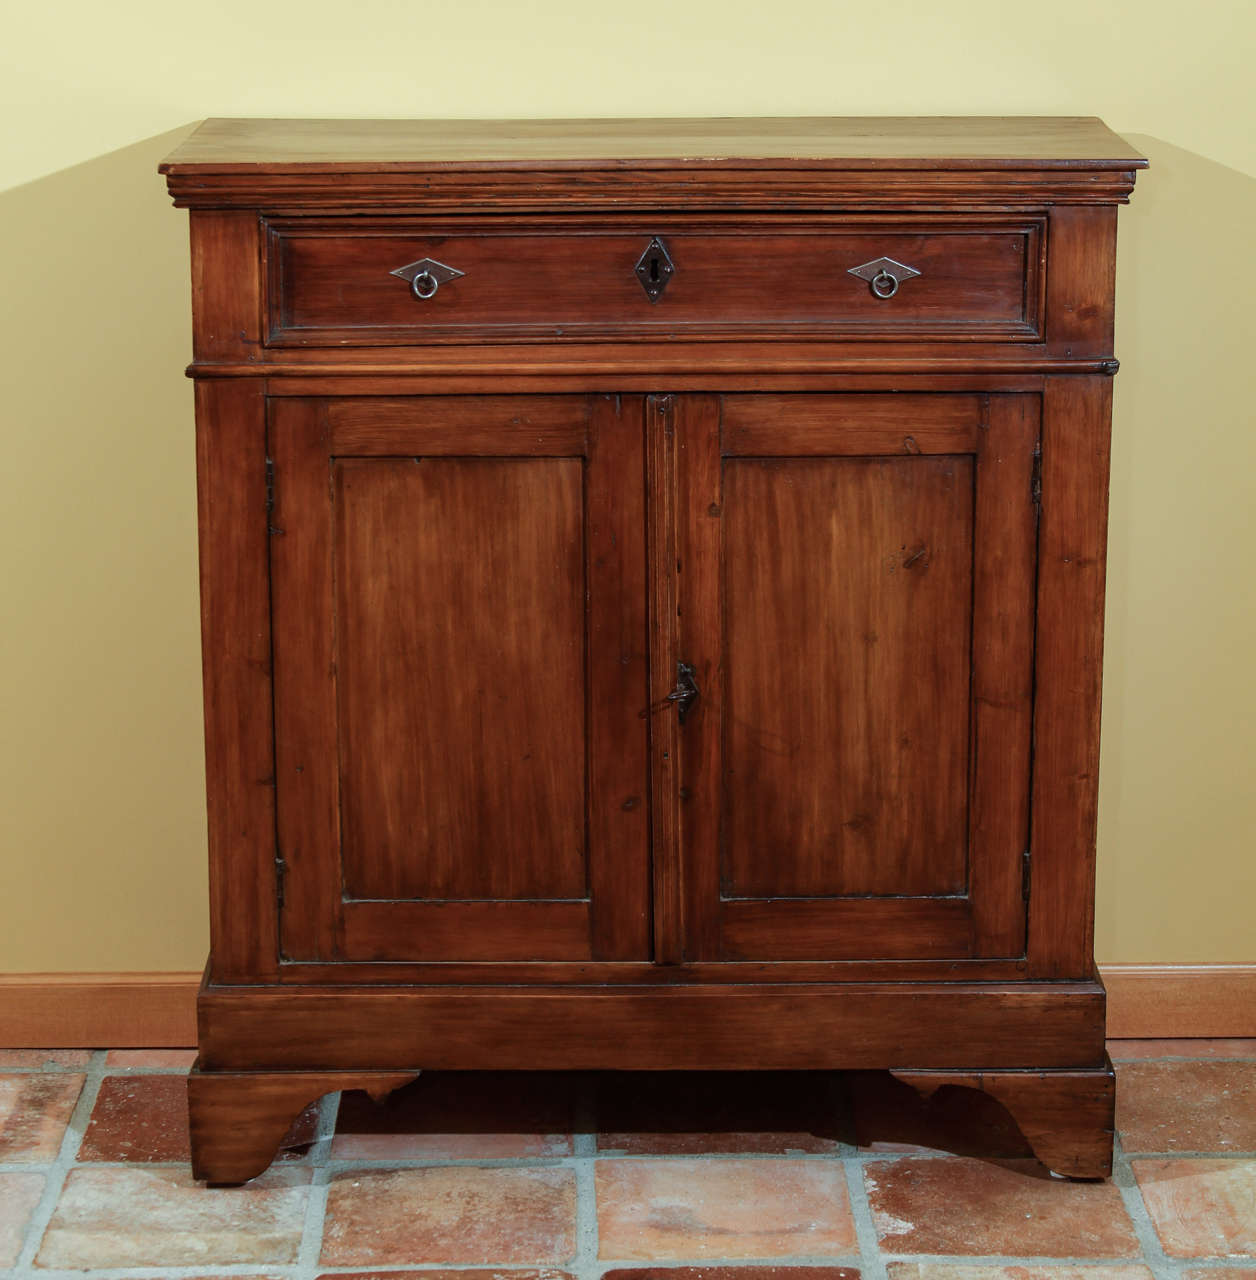 Petite French Buffet with Drawer

This is a small buffet with a lot of storage.  It is a wonderful size and works well in most any room.

The drawer is a single long drawer with the original old lock & escutcheon and two reproduction pulls from